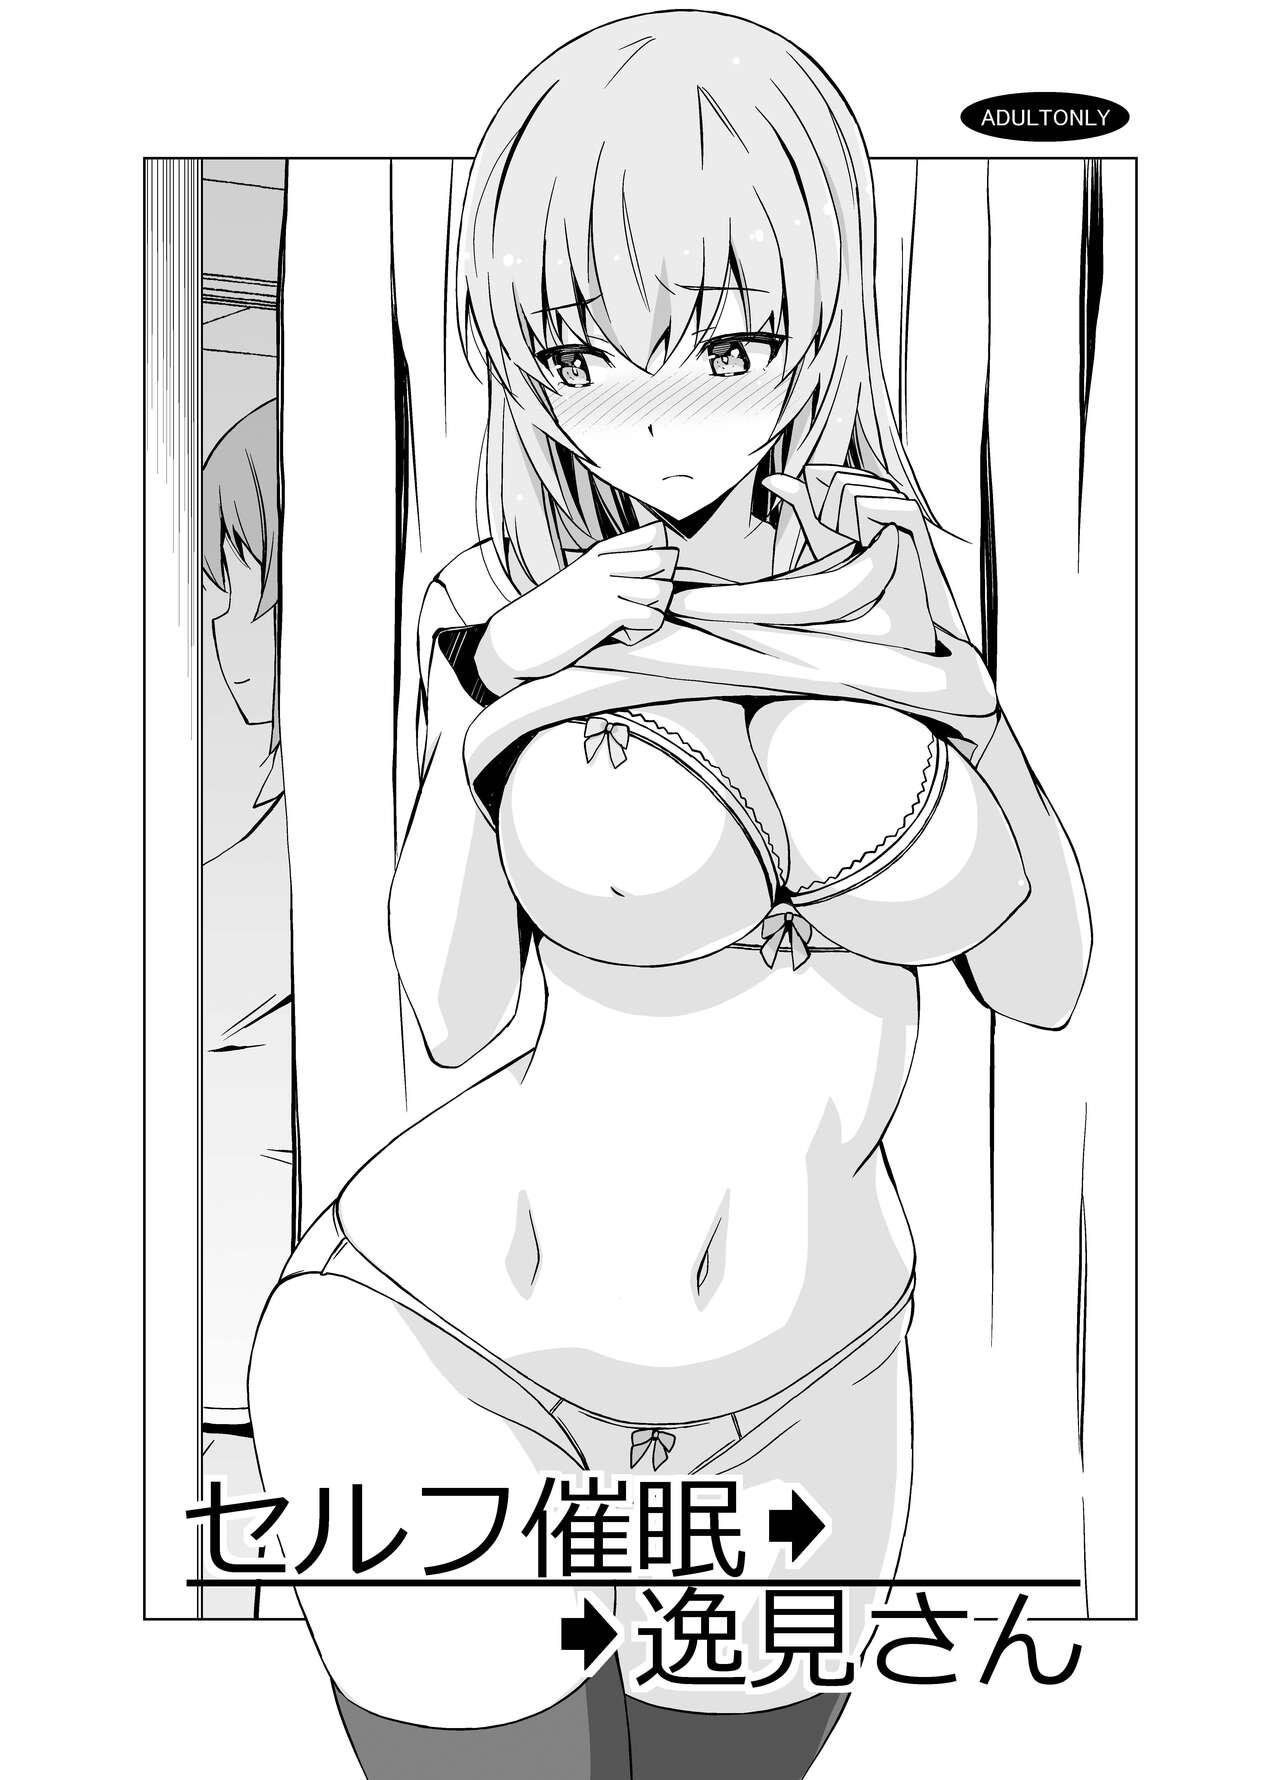 Punished Self Saimin Itsumi-san - Girls und panzer Cheating Wife - Picture 1